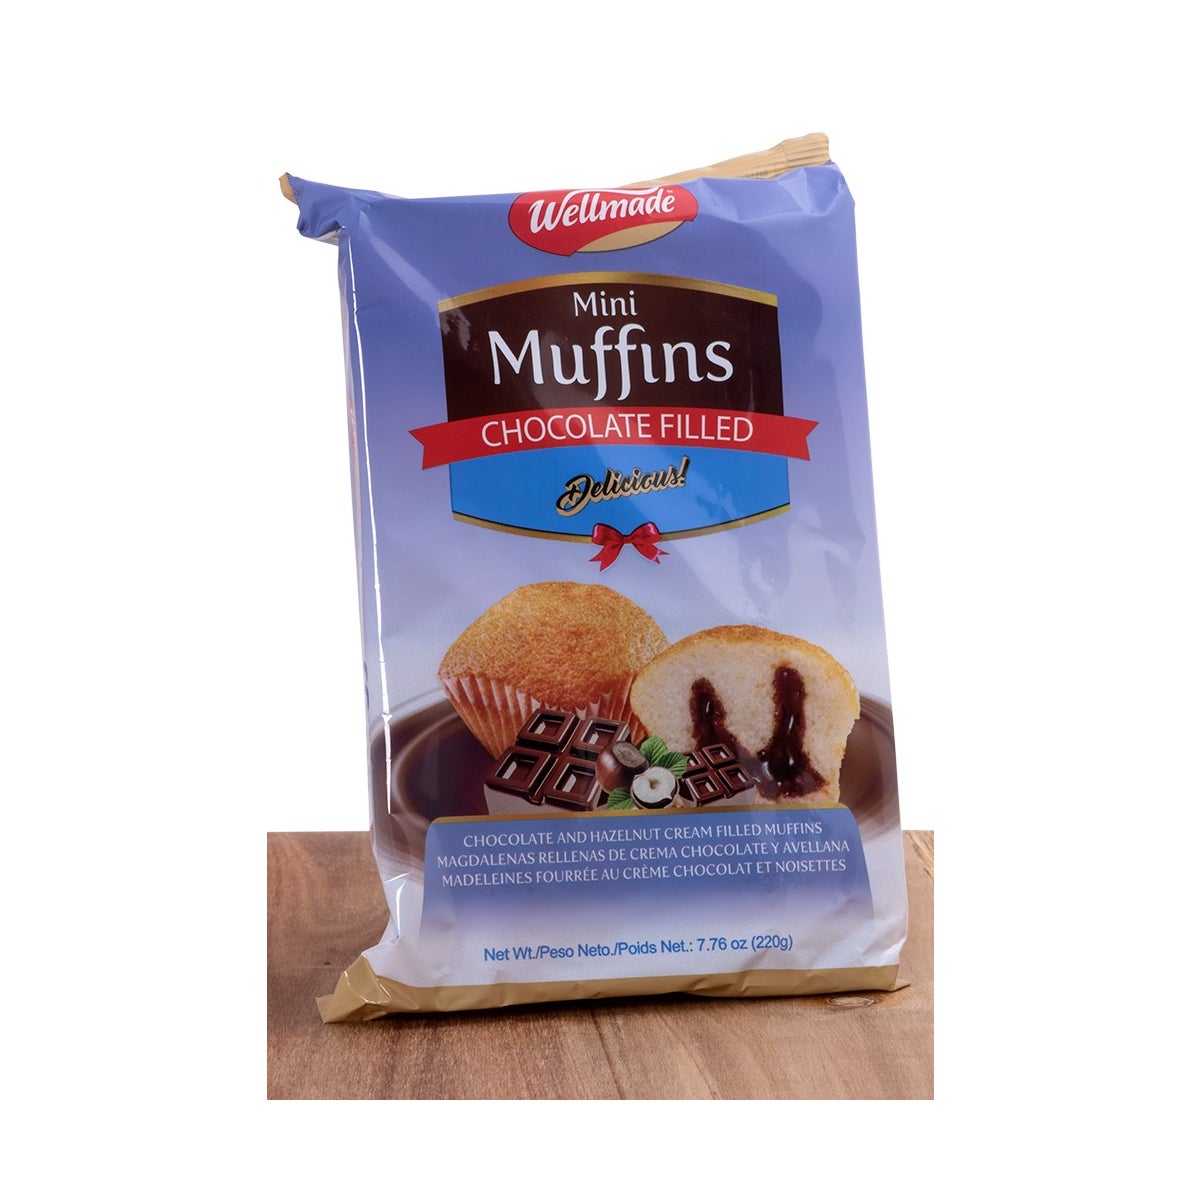 Wellmade Chocolate Filled Muffins 220g * 16